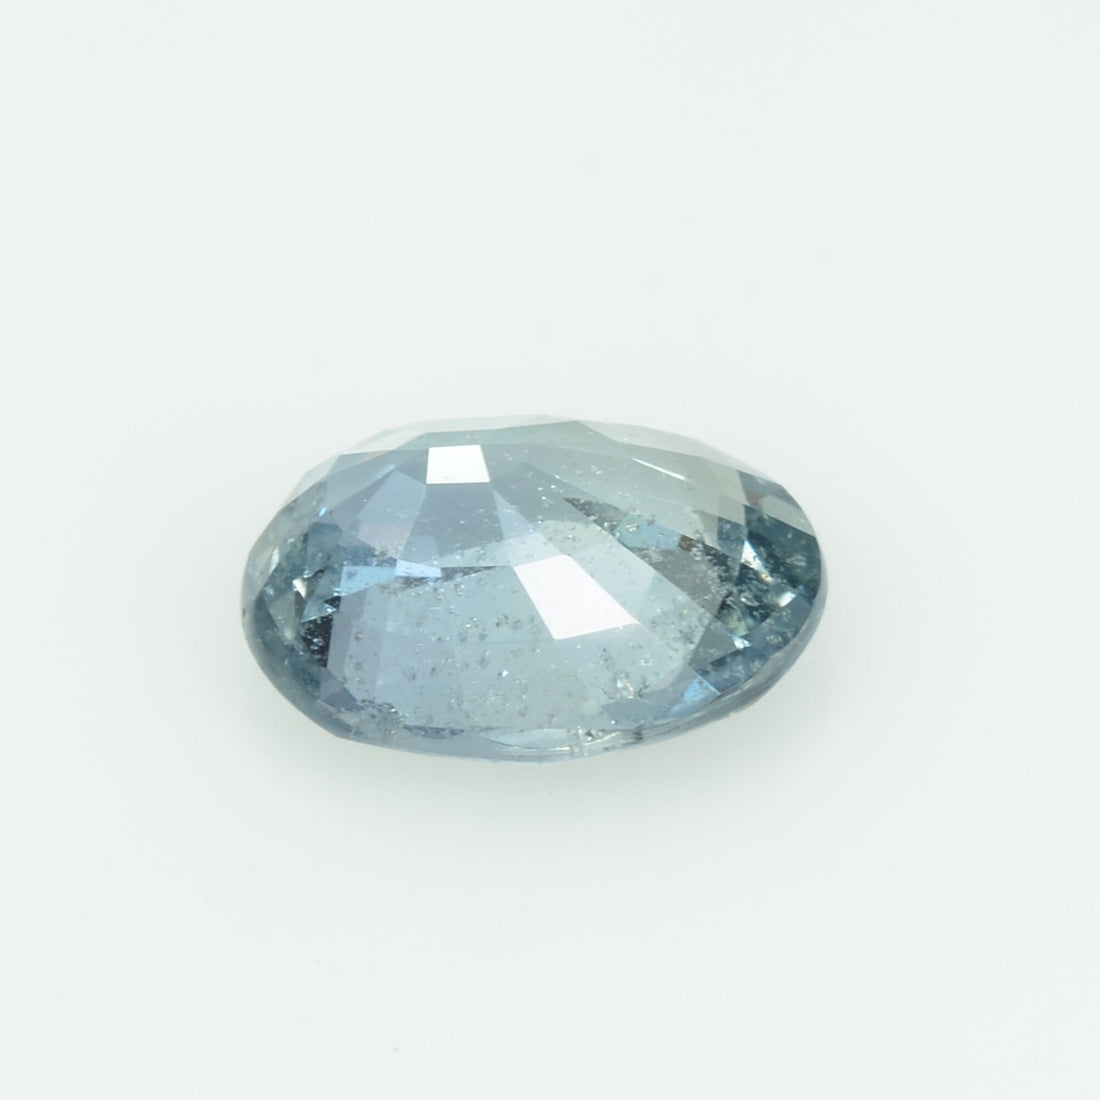 3.14 Cts Natural Pastel Blue Sapphire Loose Gemstone Oval Cut